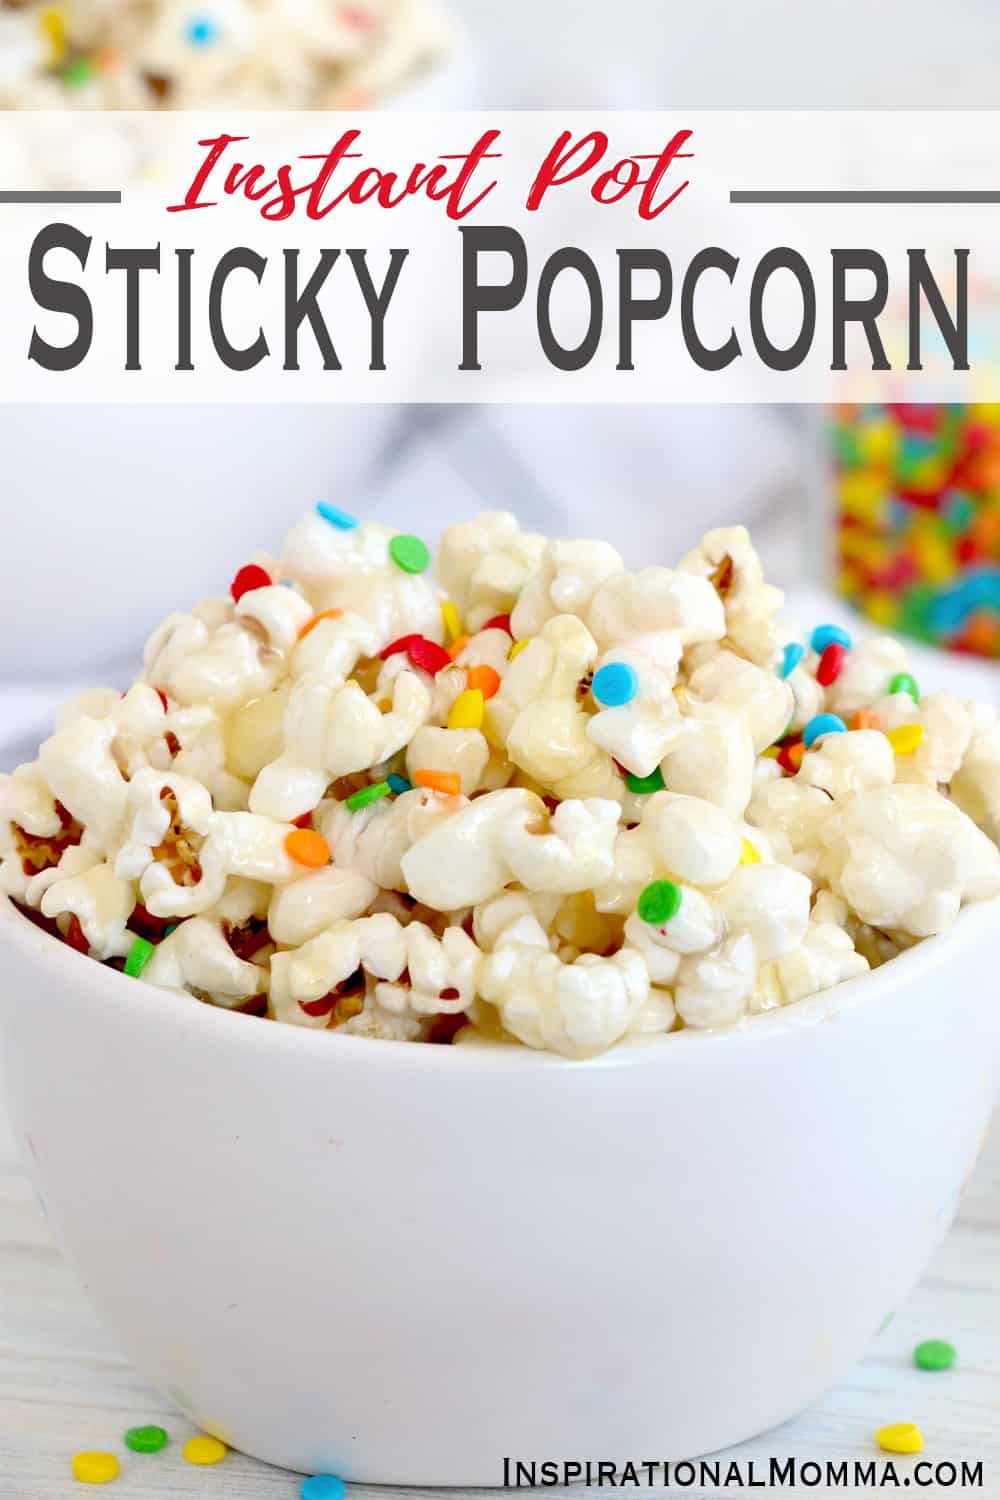 Instant Pot Sticky Popcorn is covered with a sweet vanilla glaze. It is a perfect sweet snack made quickly in your instant pot. #inspirationalmomma #instantpotstickypopcorn #stickypopcorn #instantpotpopcorn #popcorn #easysnacks #recipes